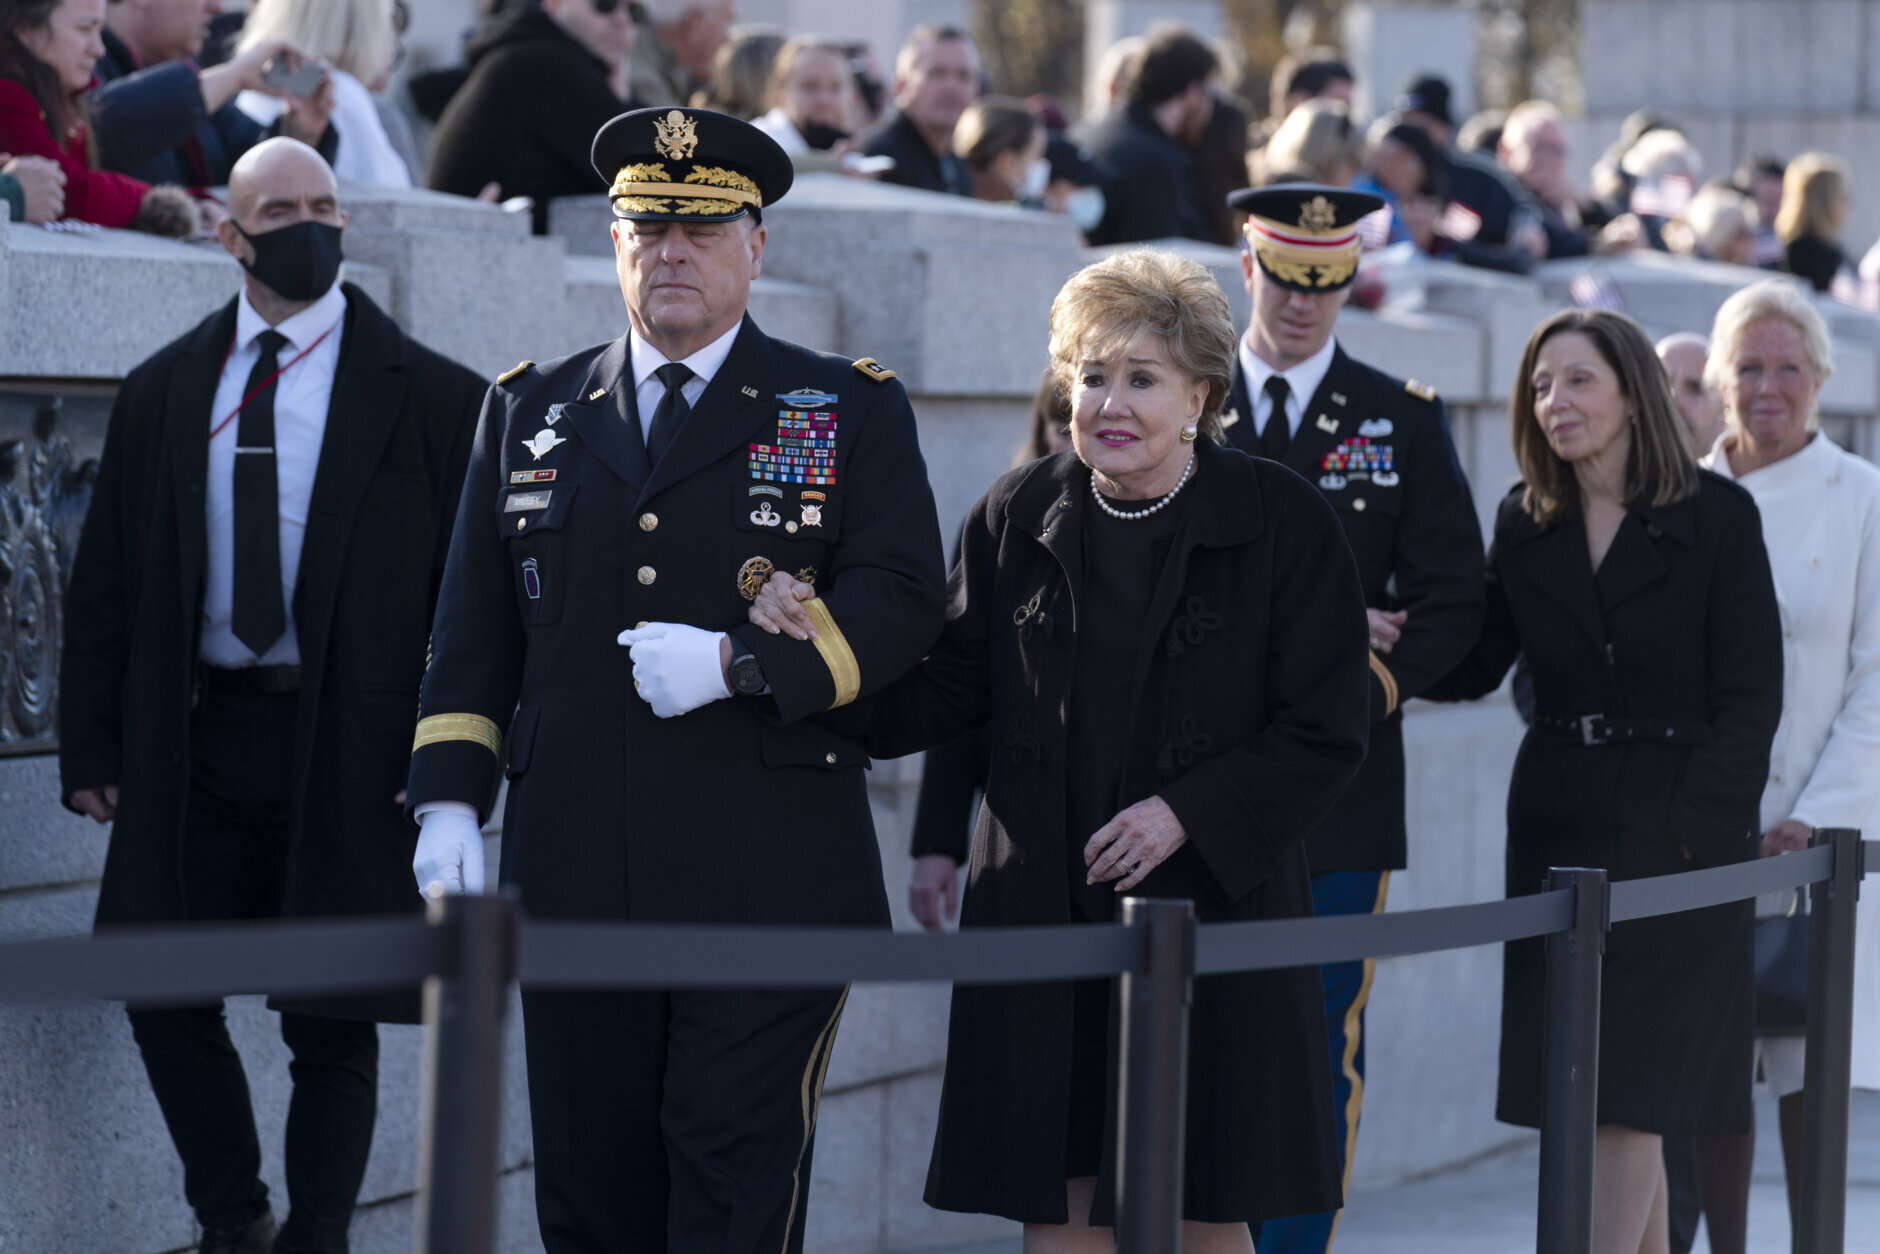 Chairman of the Joint Chiefs of Staff Gen. Mark Milley walks with former Sen. Elizabeth Dole and another member of the military walks with Robin Dole, second from right, as leave after a ceremony held in honor of former Sen. Bob Dole, R-Kan., at the National World War II Memorial, on Friday, Dec. 10, 2021, in Washington. (AP Photo/Jose Luis Magana)